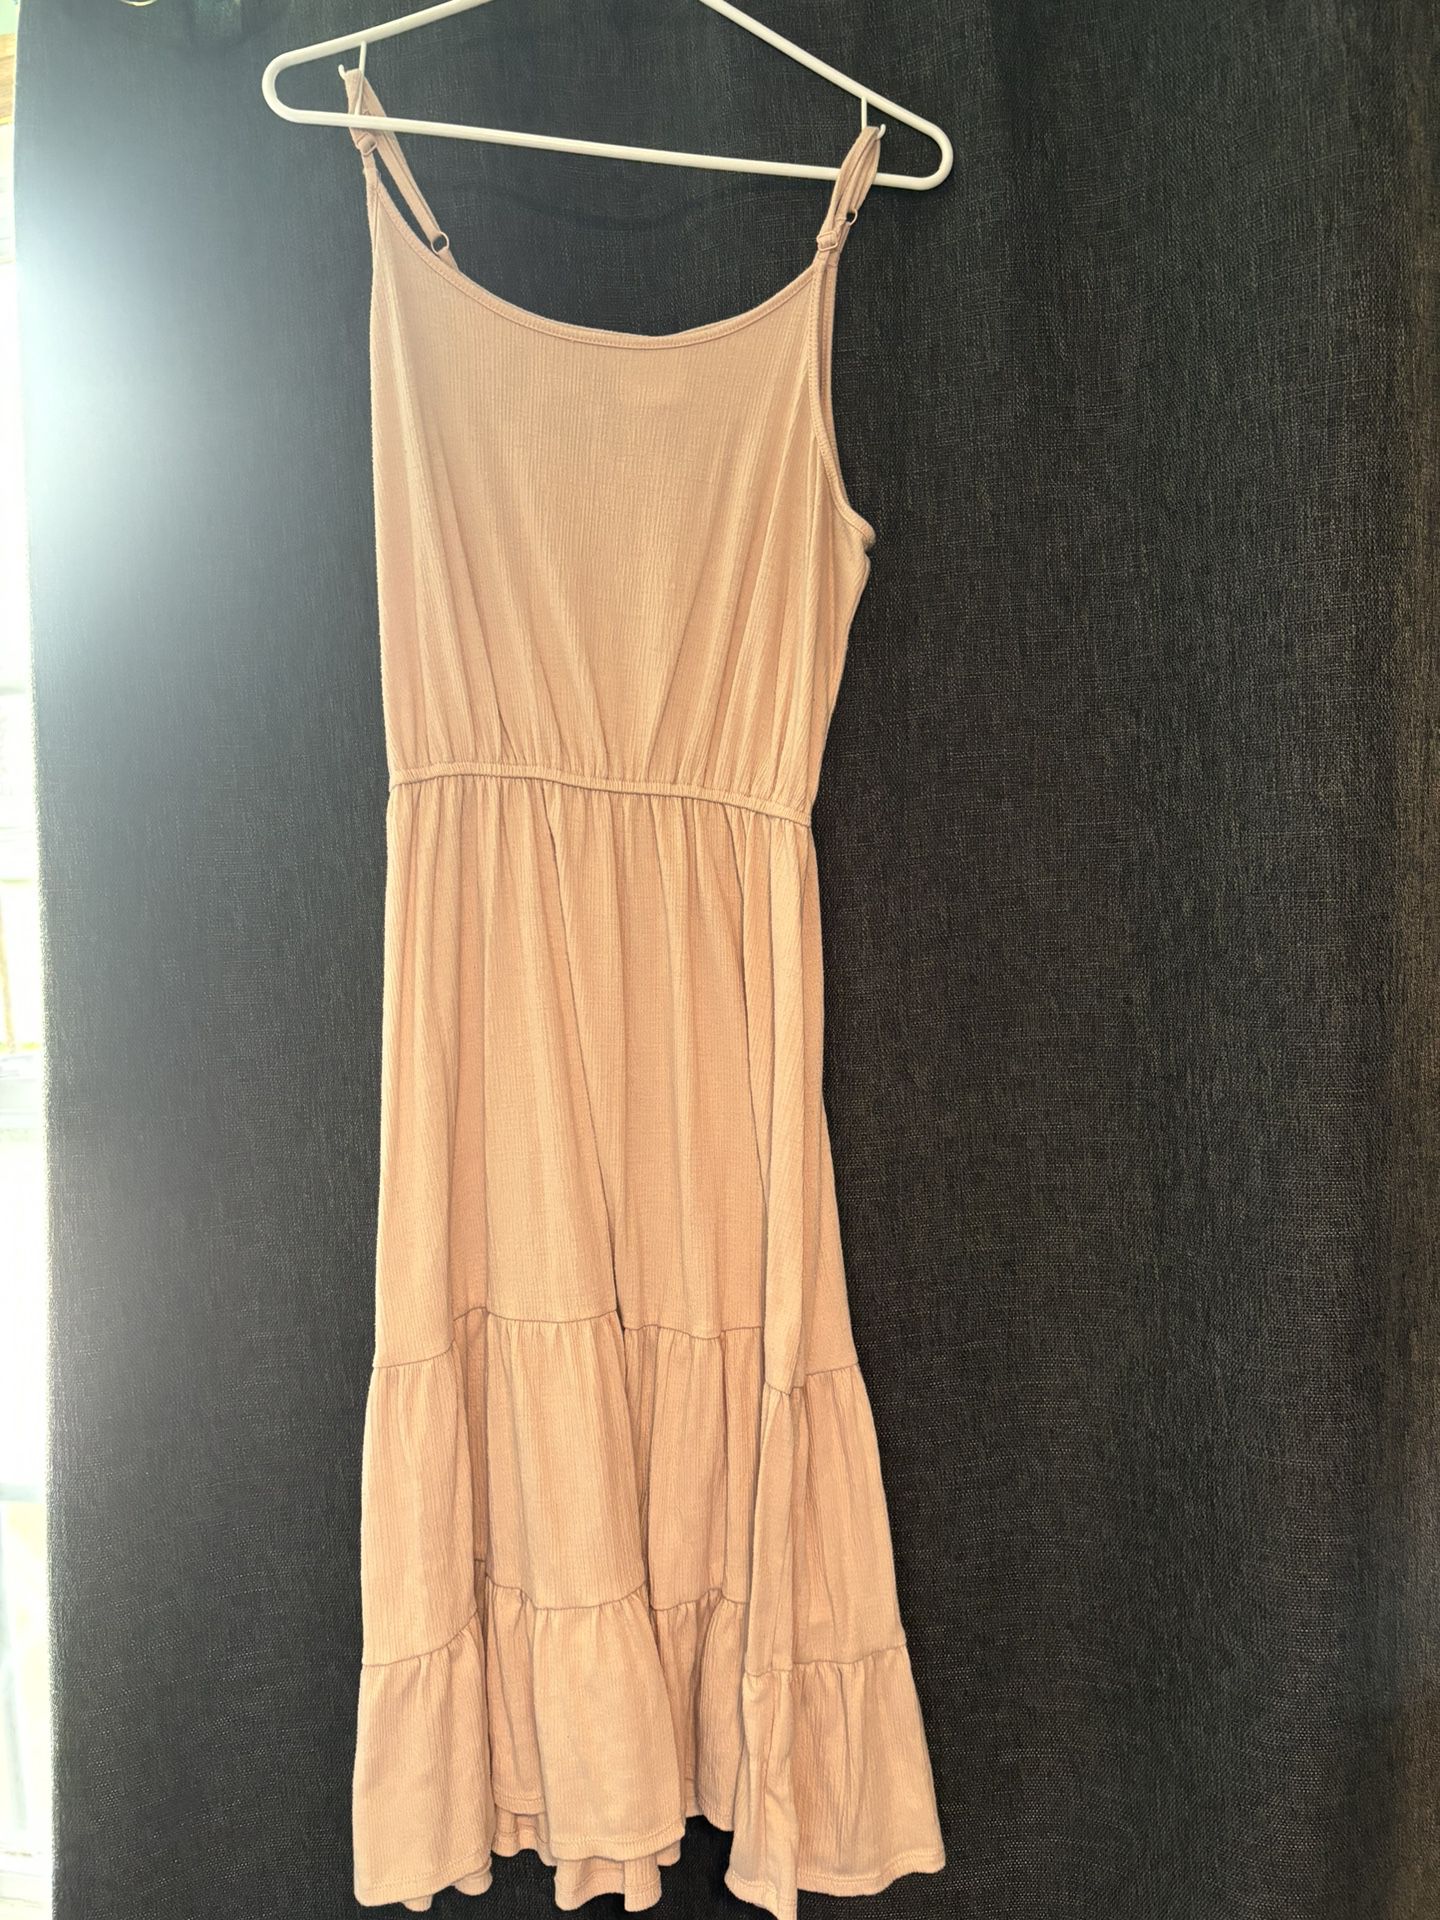 Knox Rose Country Dress